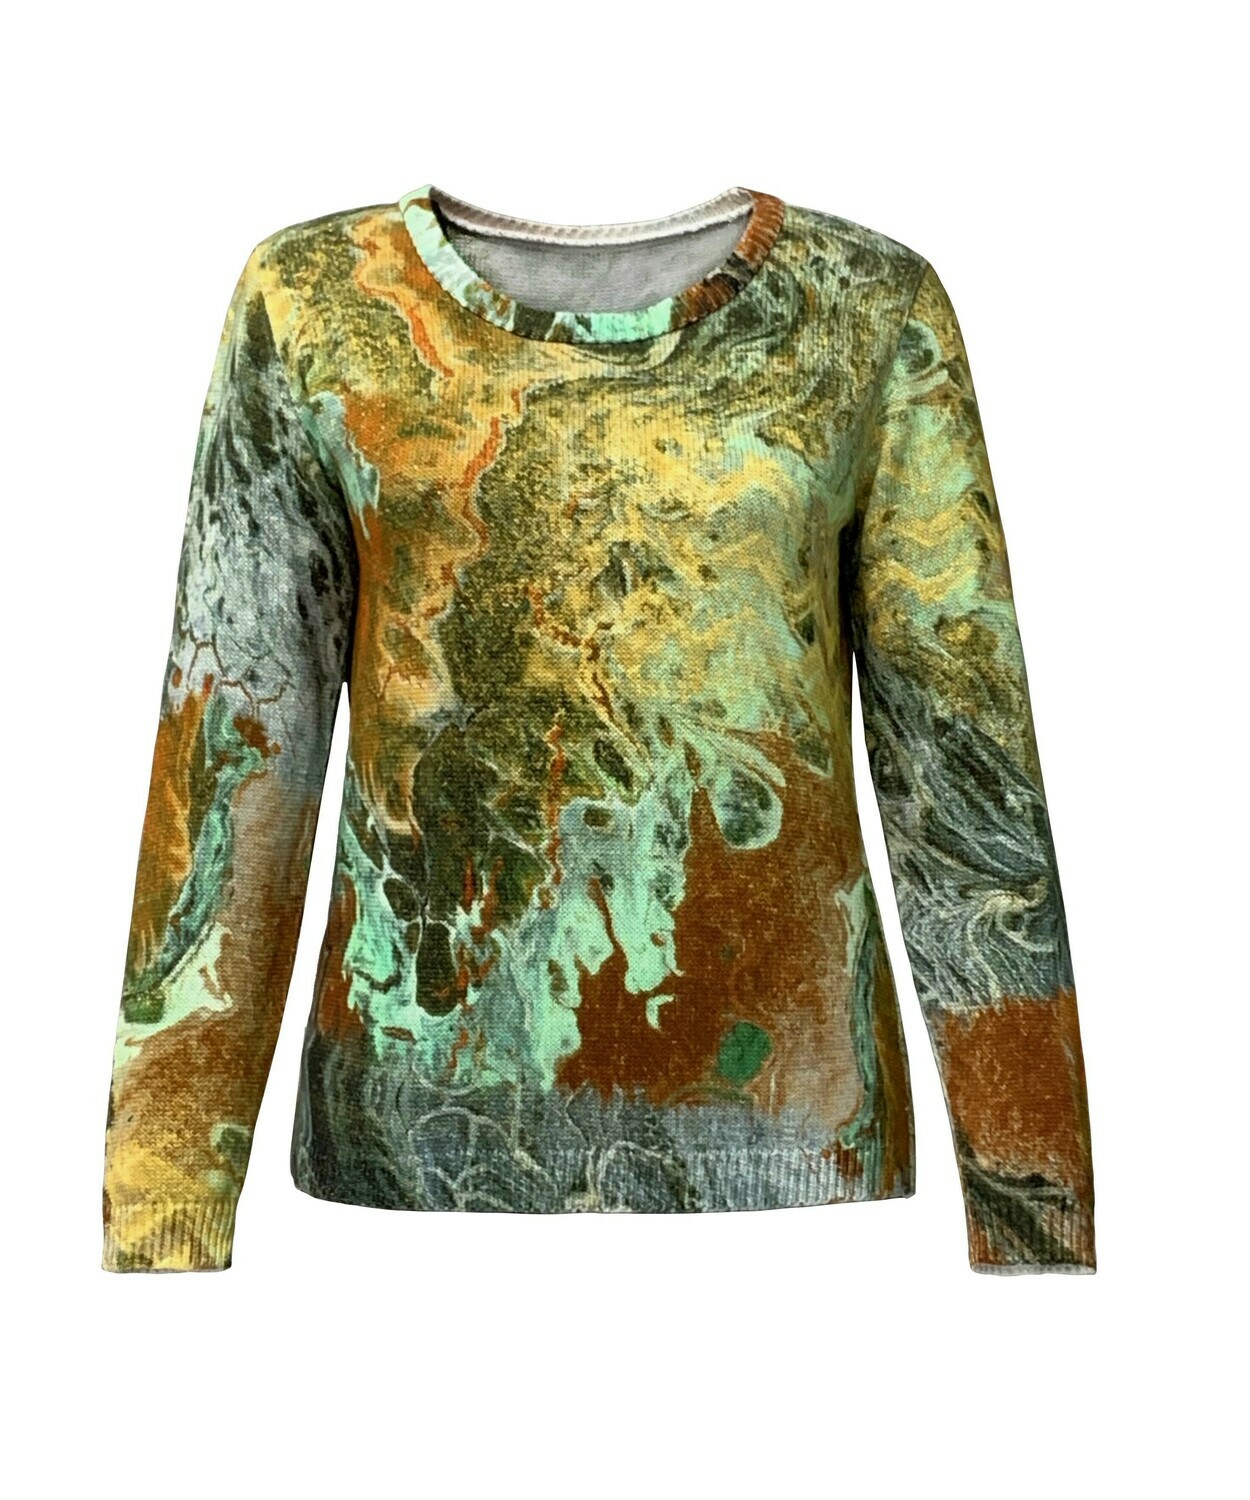 Simply Art Dolcezza: Royal Egyptian Nile Emeralds Abstract Art Sweater (1 Left!)